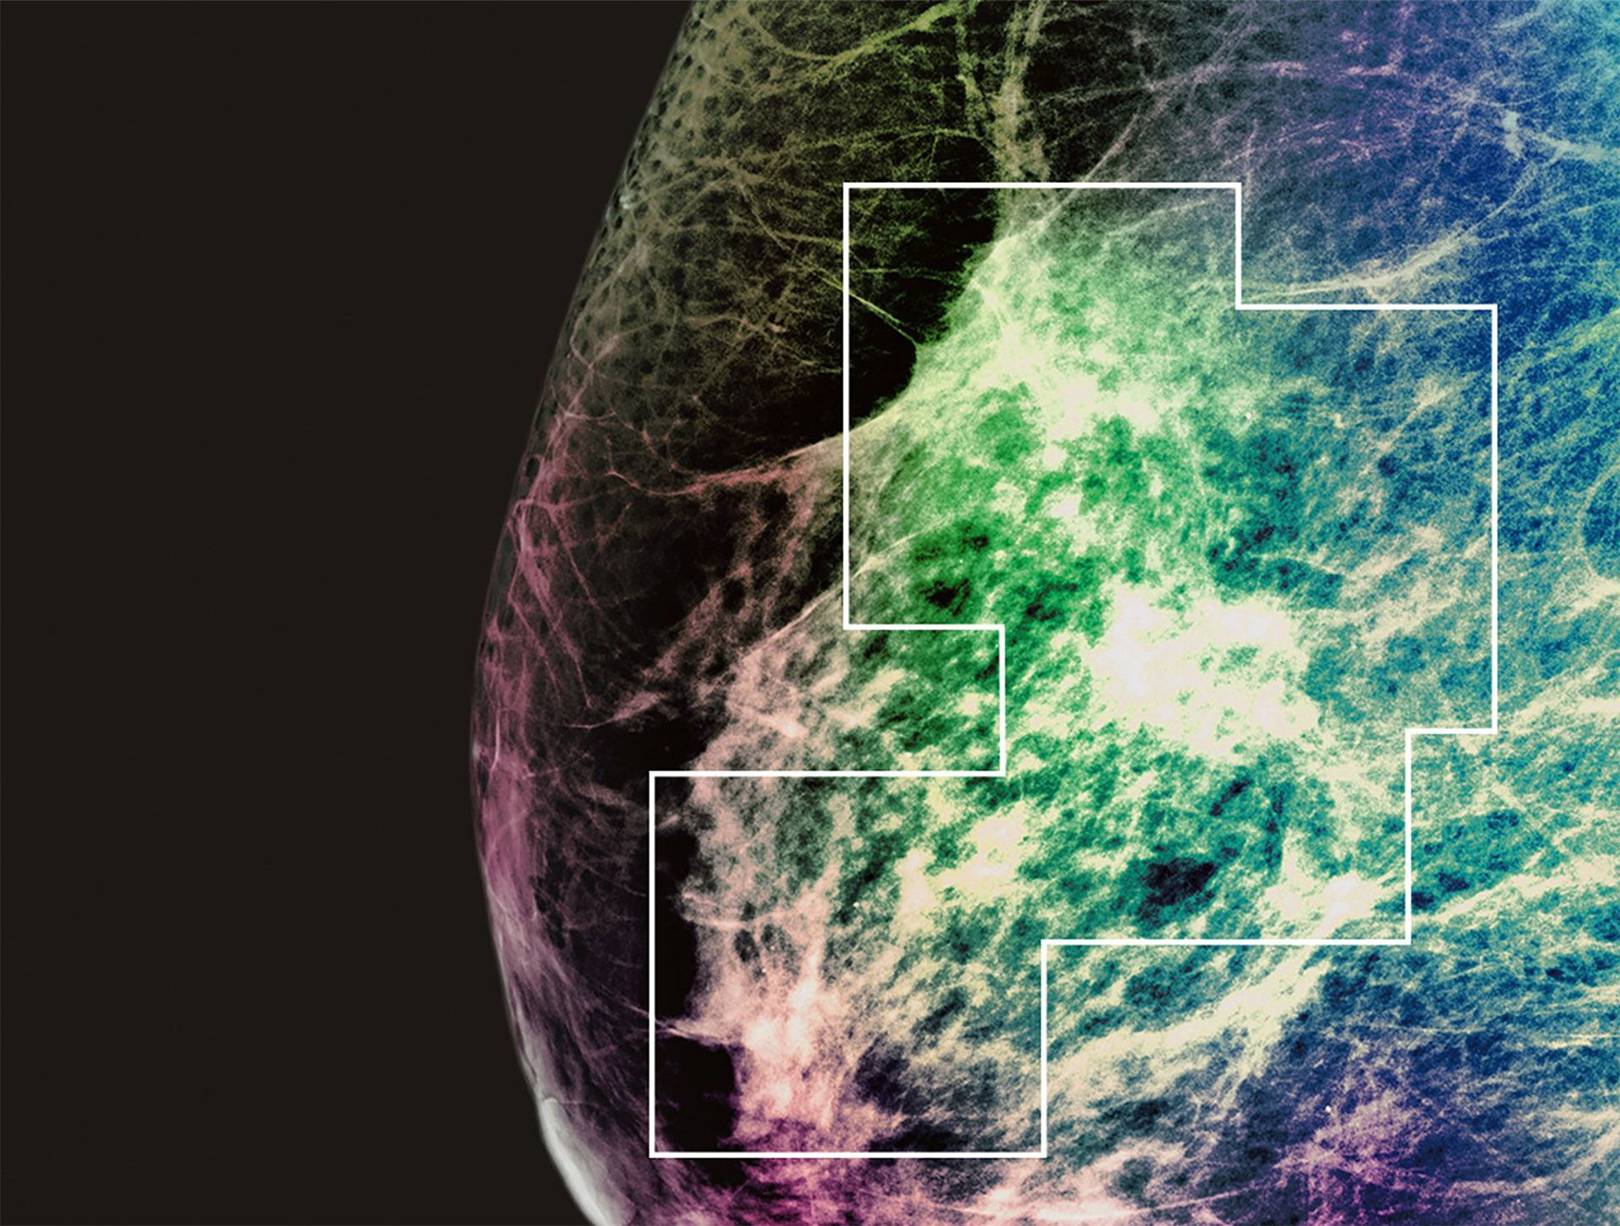 Radiology by robots: this is what breast cancer looks like tumour-hunting AI